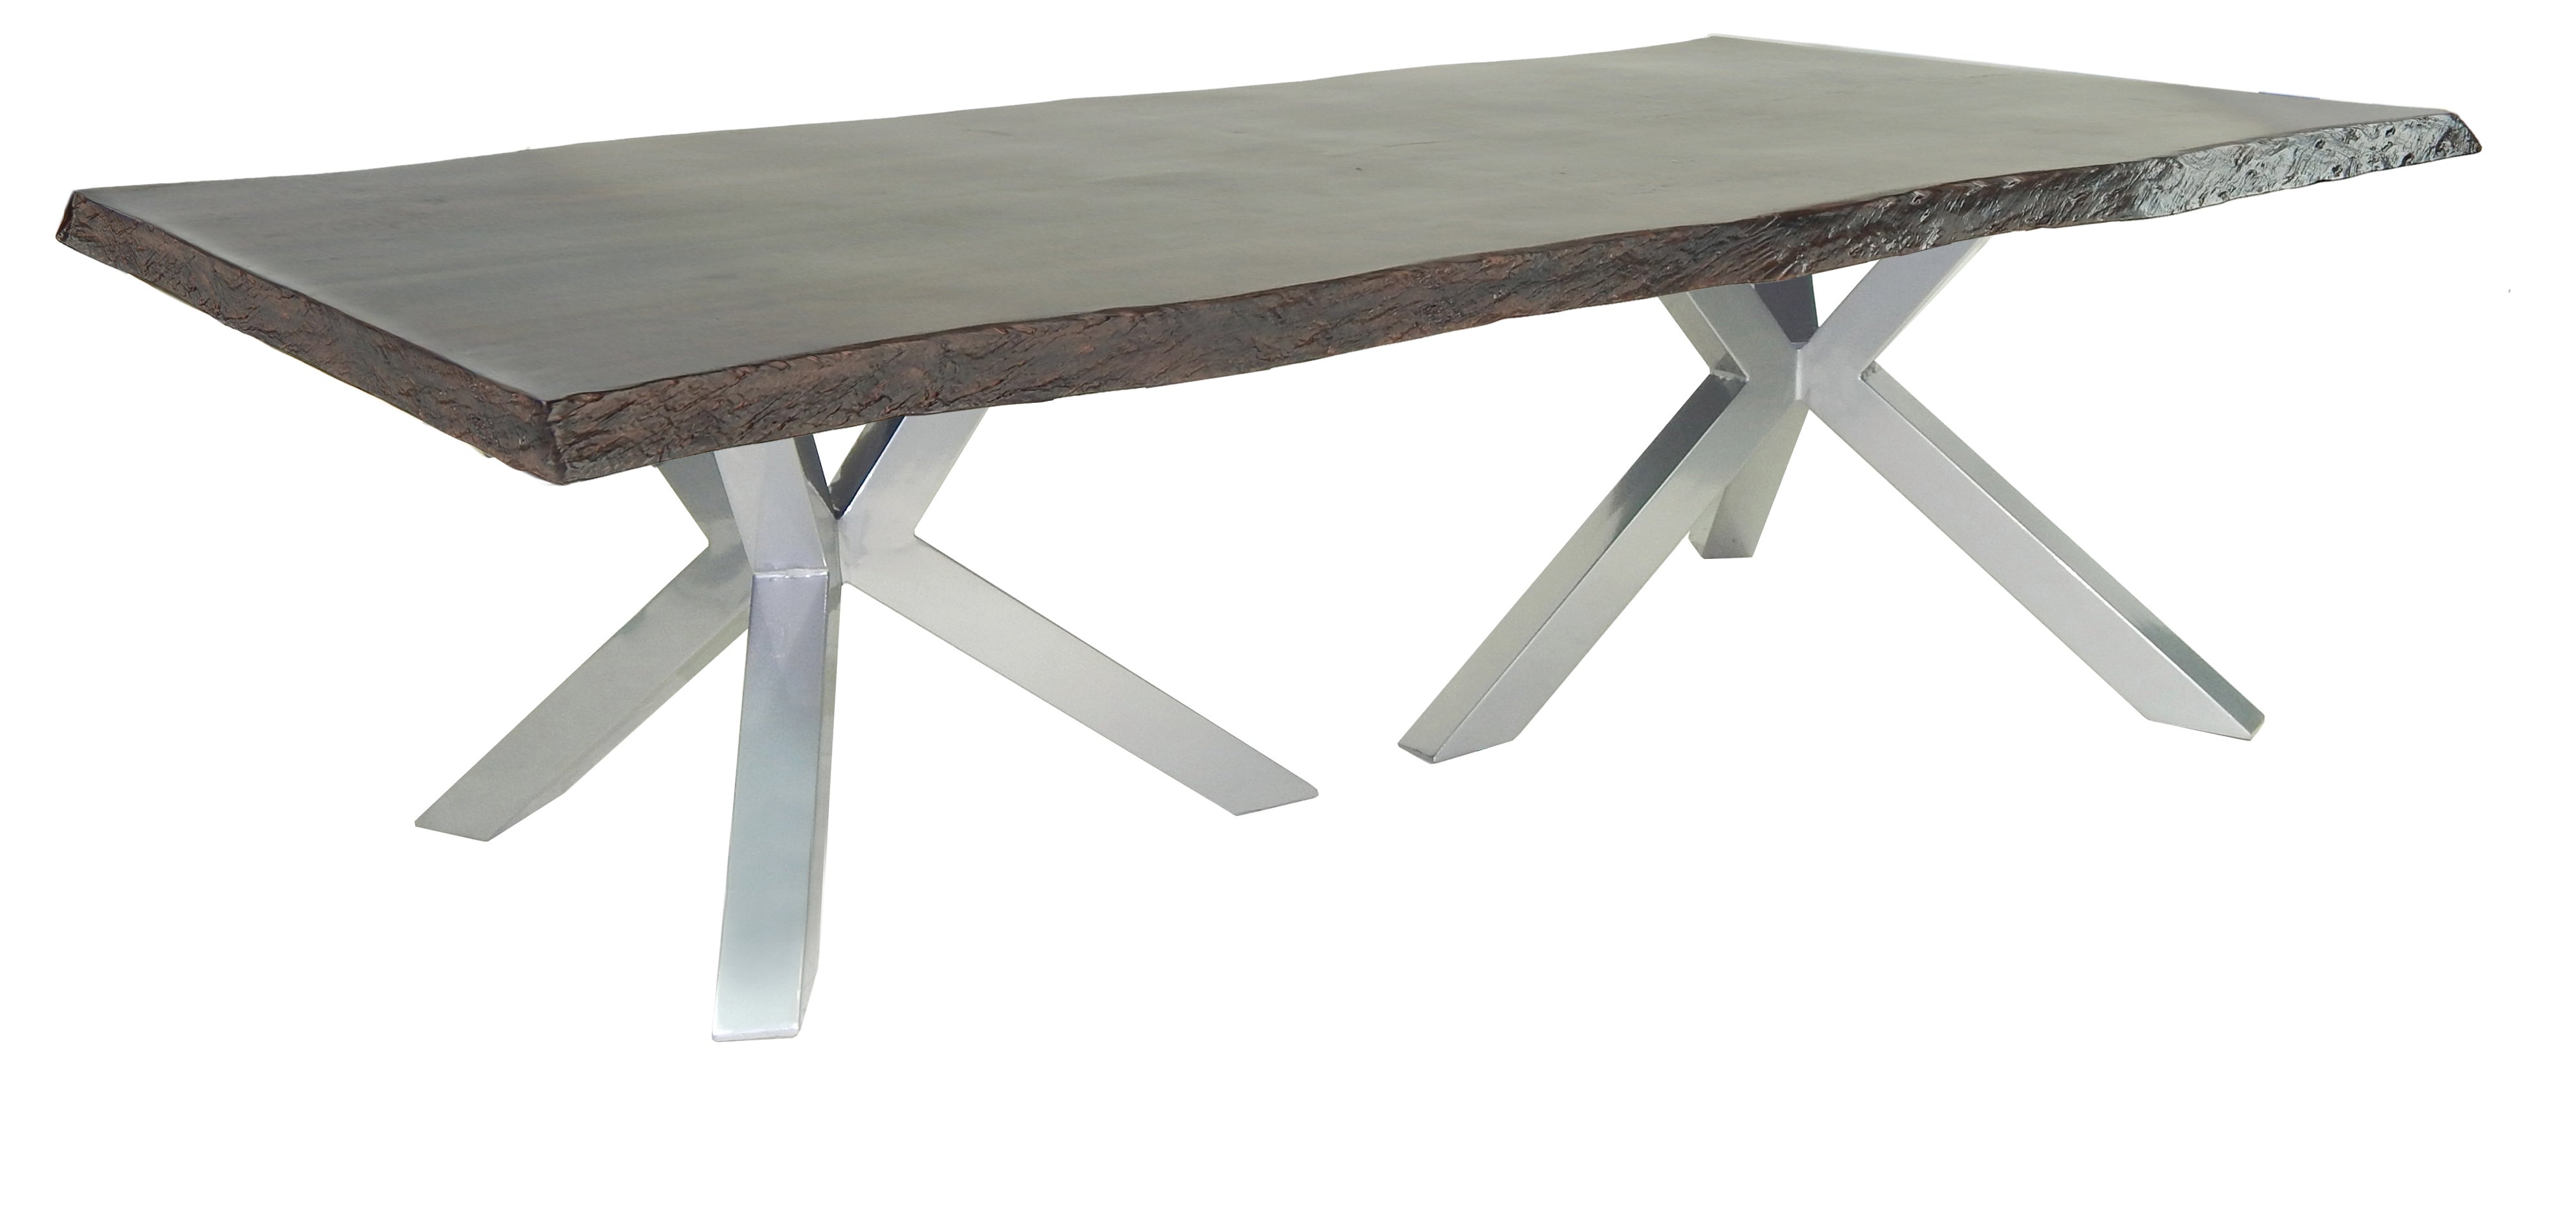 Altra 49" x 108" Rectangle Dining Table By Castelle